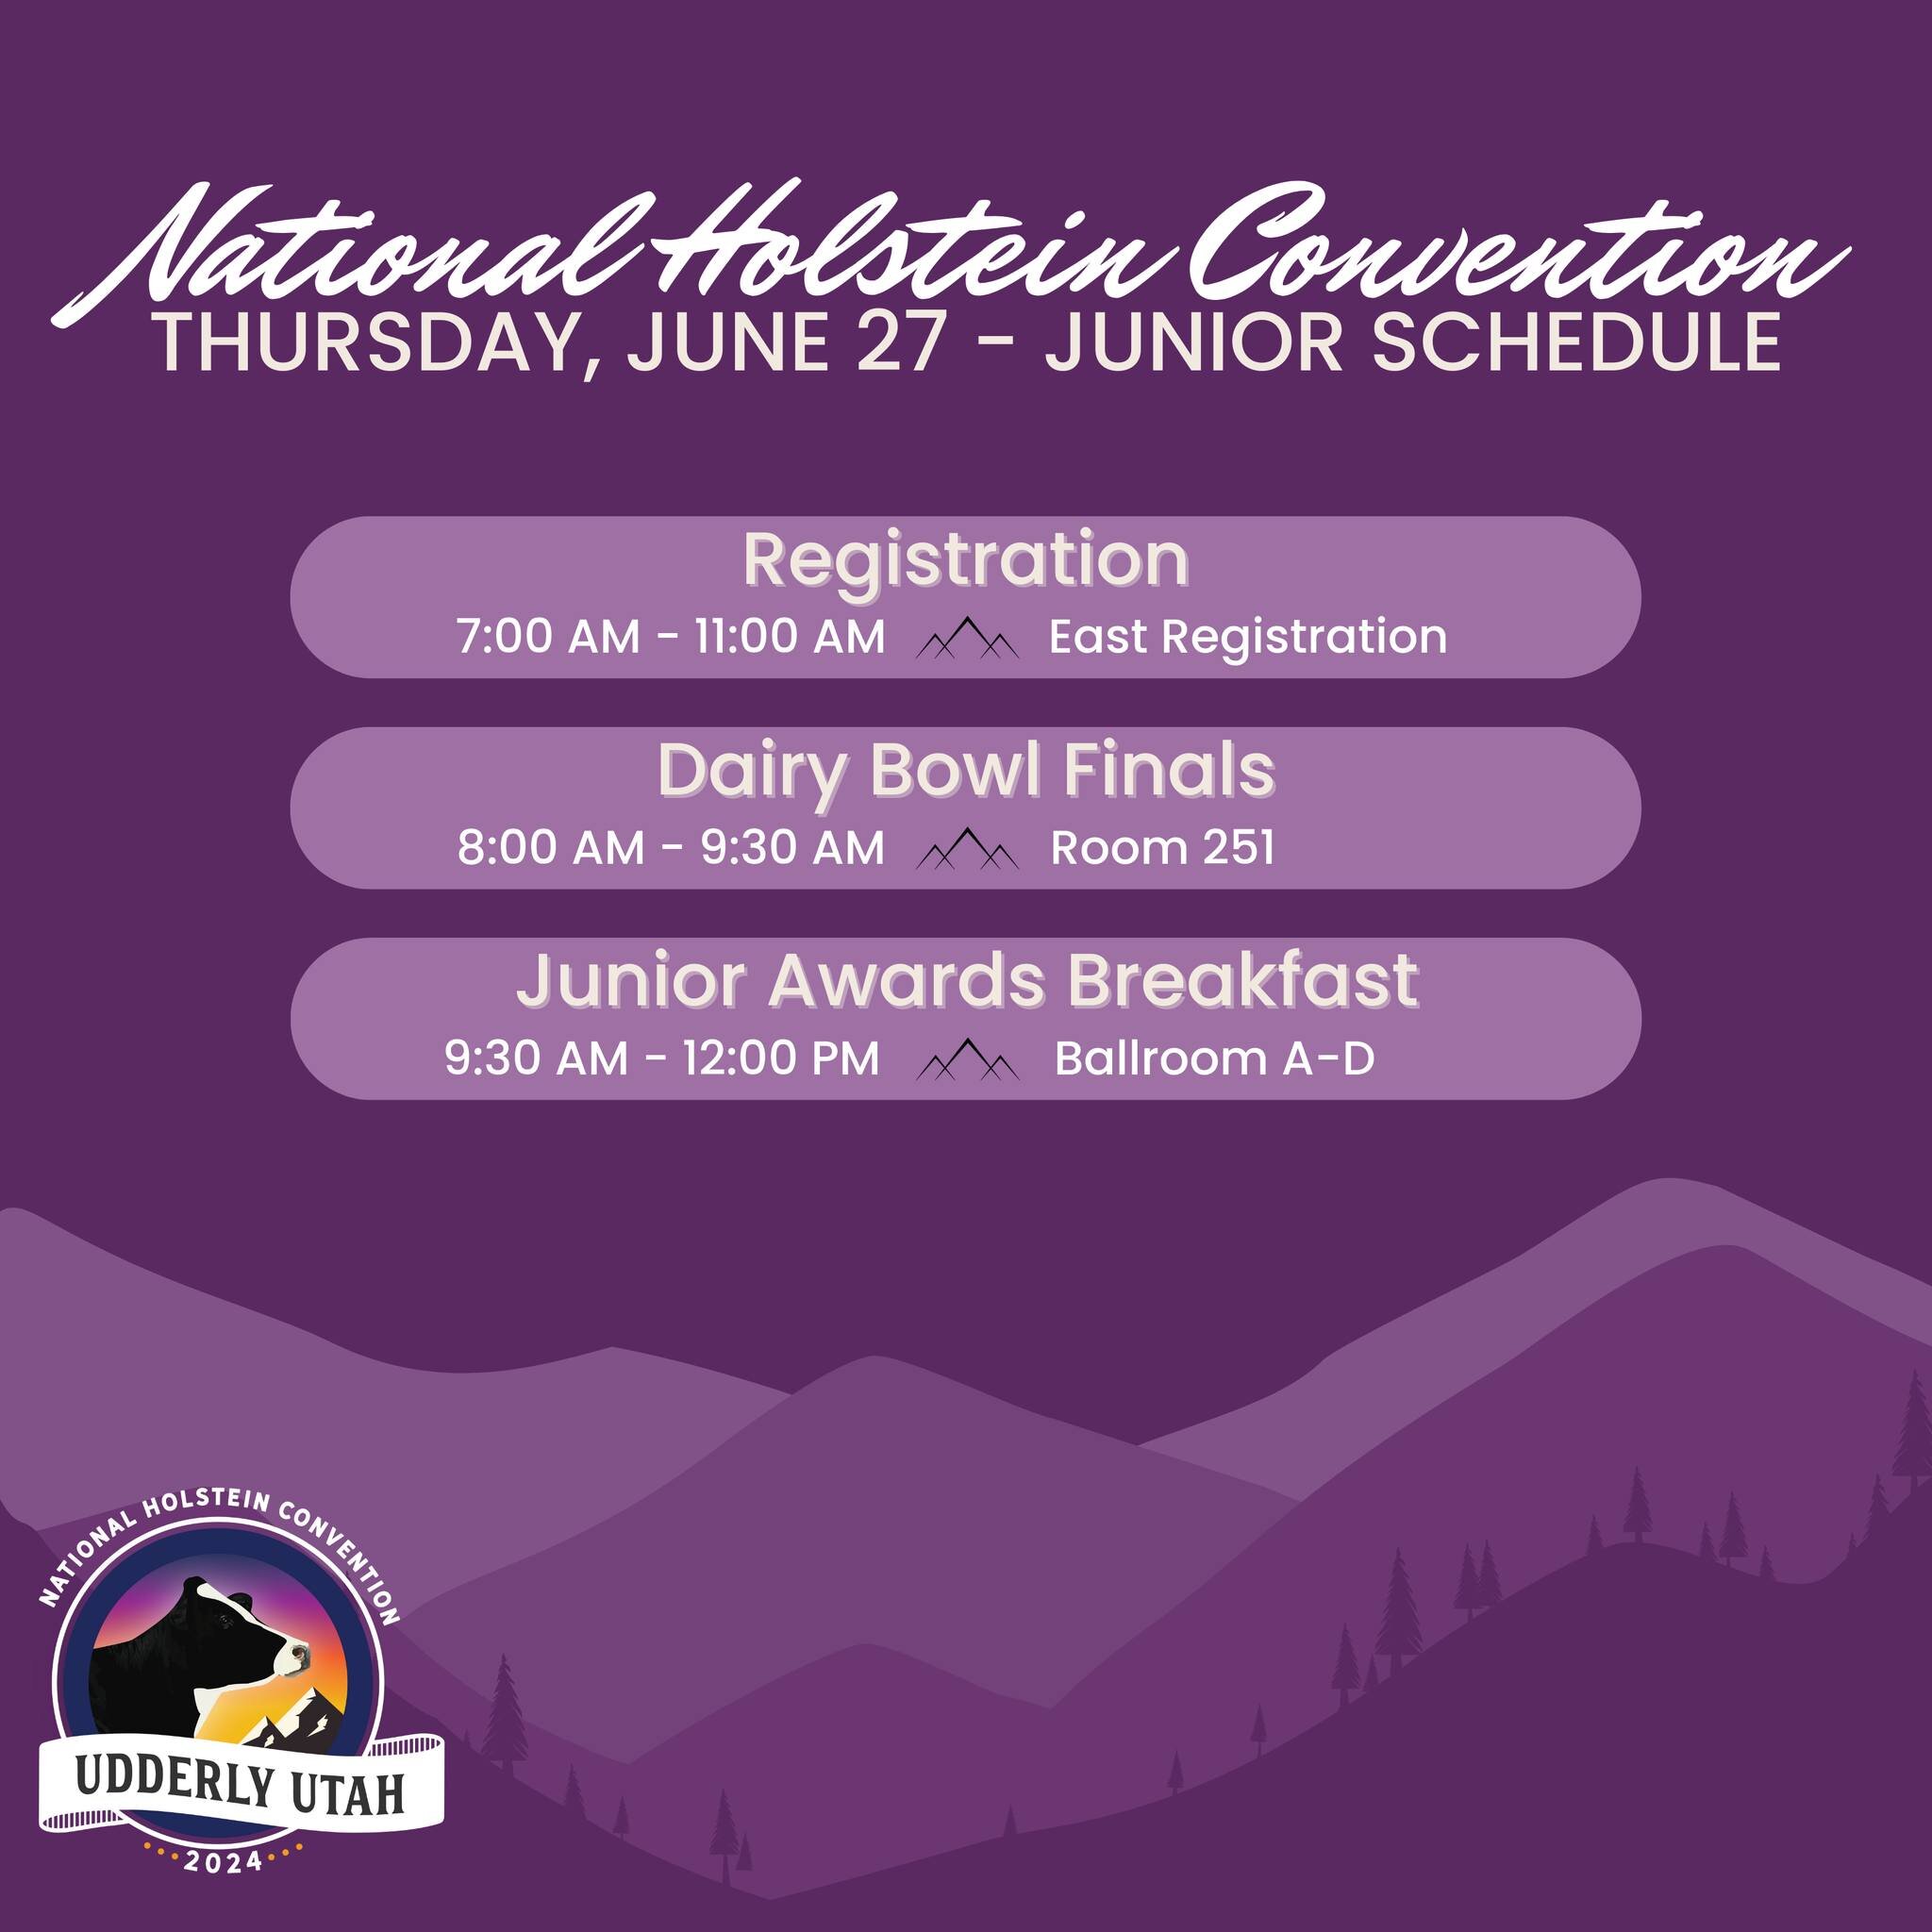 Another week, another peek at the 2024 National Holstein Convention schedule! 👀

The last day of the convention will wrap up Holstein Association USA&rsquo;s Annual Meeting and celebrate our outstanding Junior members.

Click the link in our bio to 